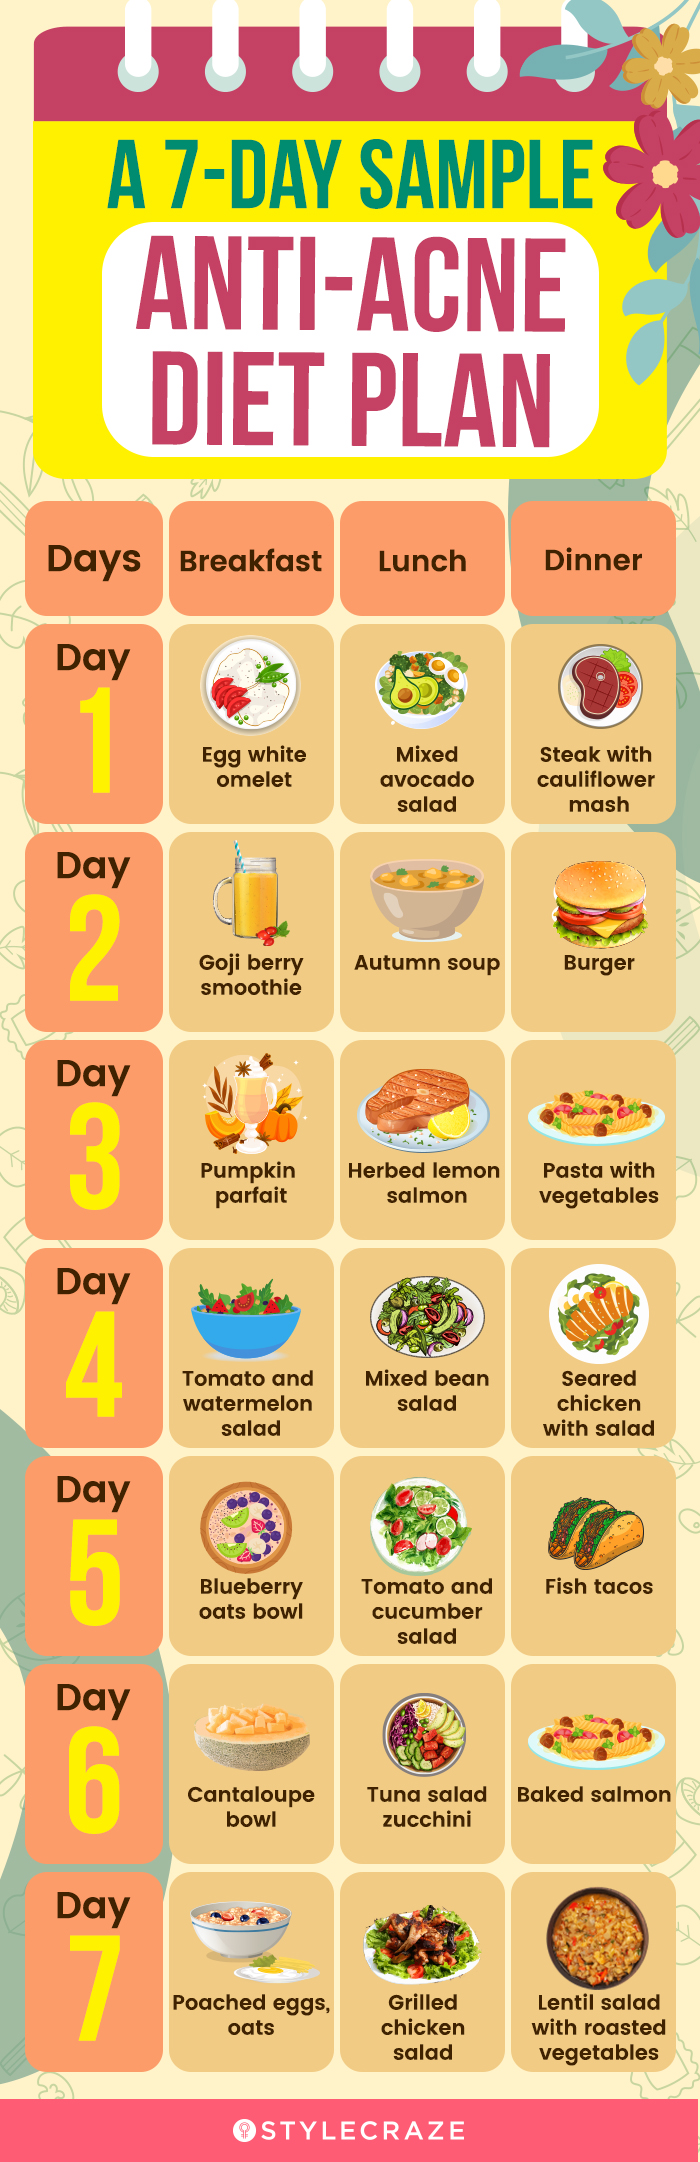 a 7 day sample anti acne diet plan (infographic)